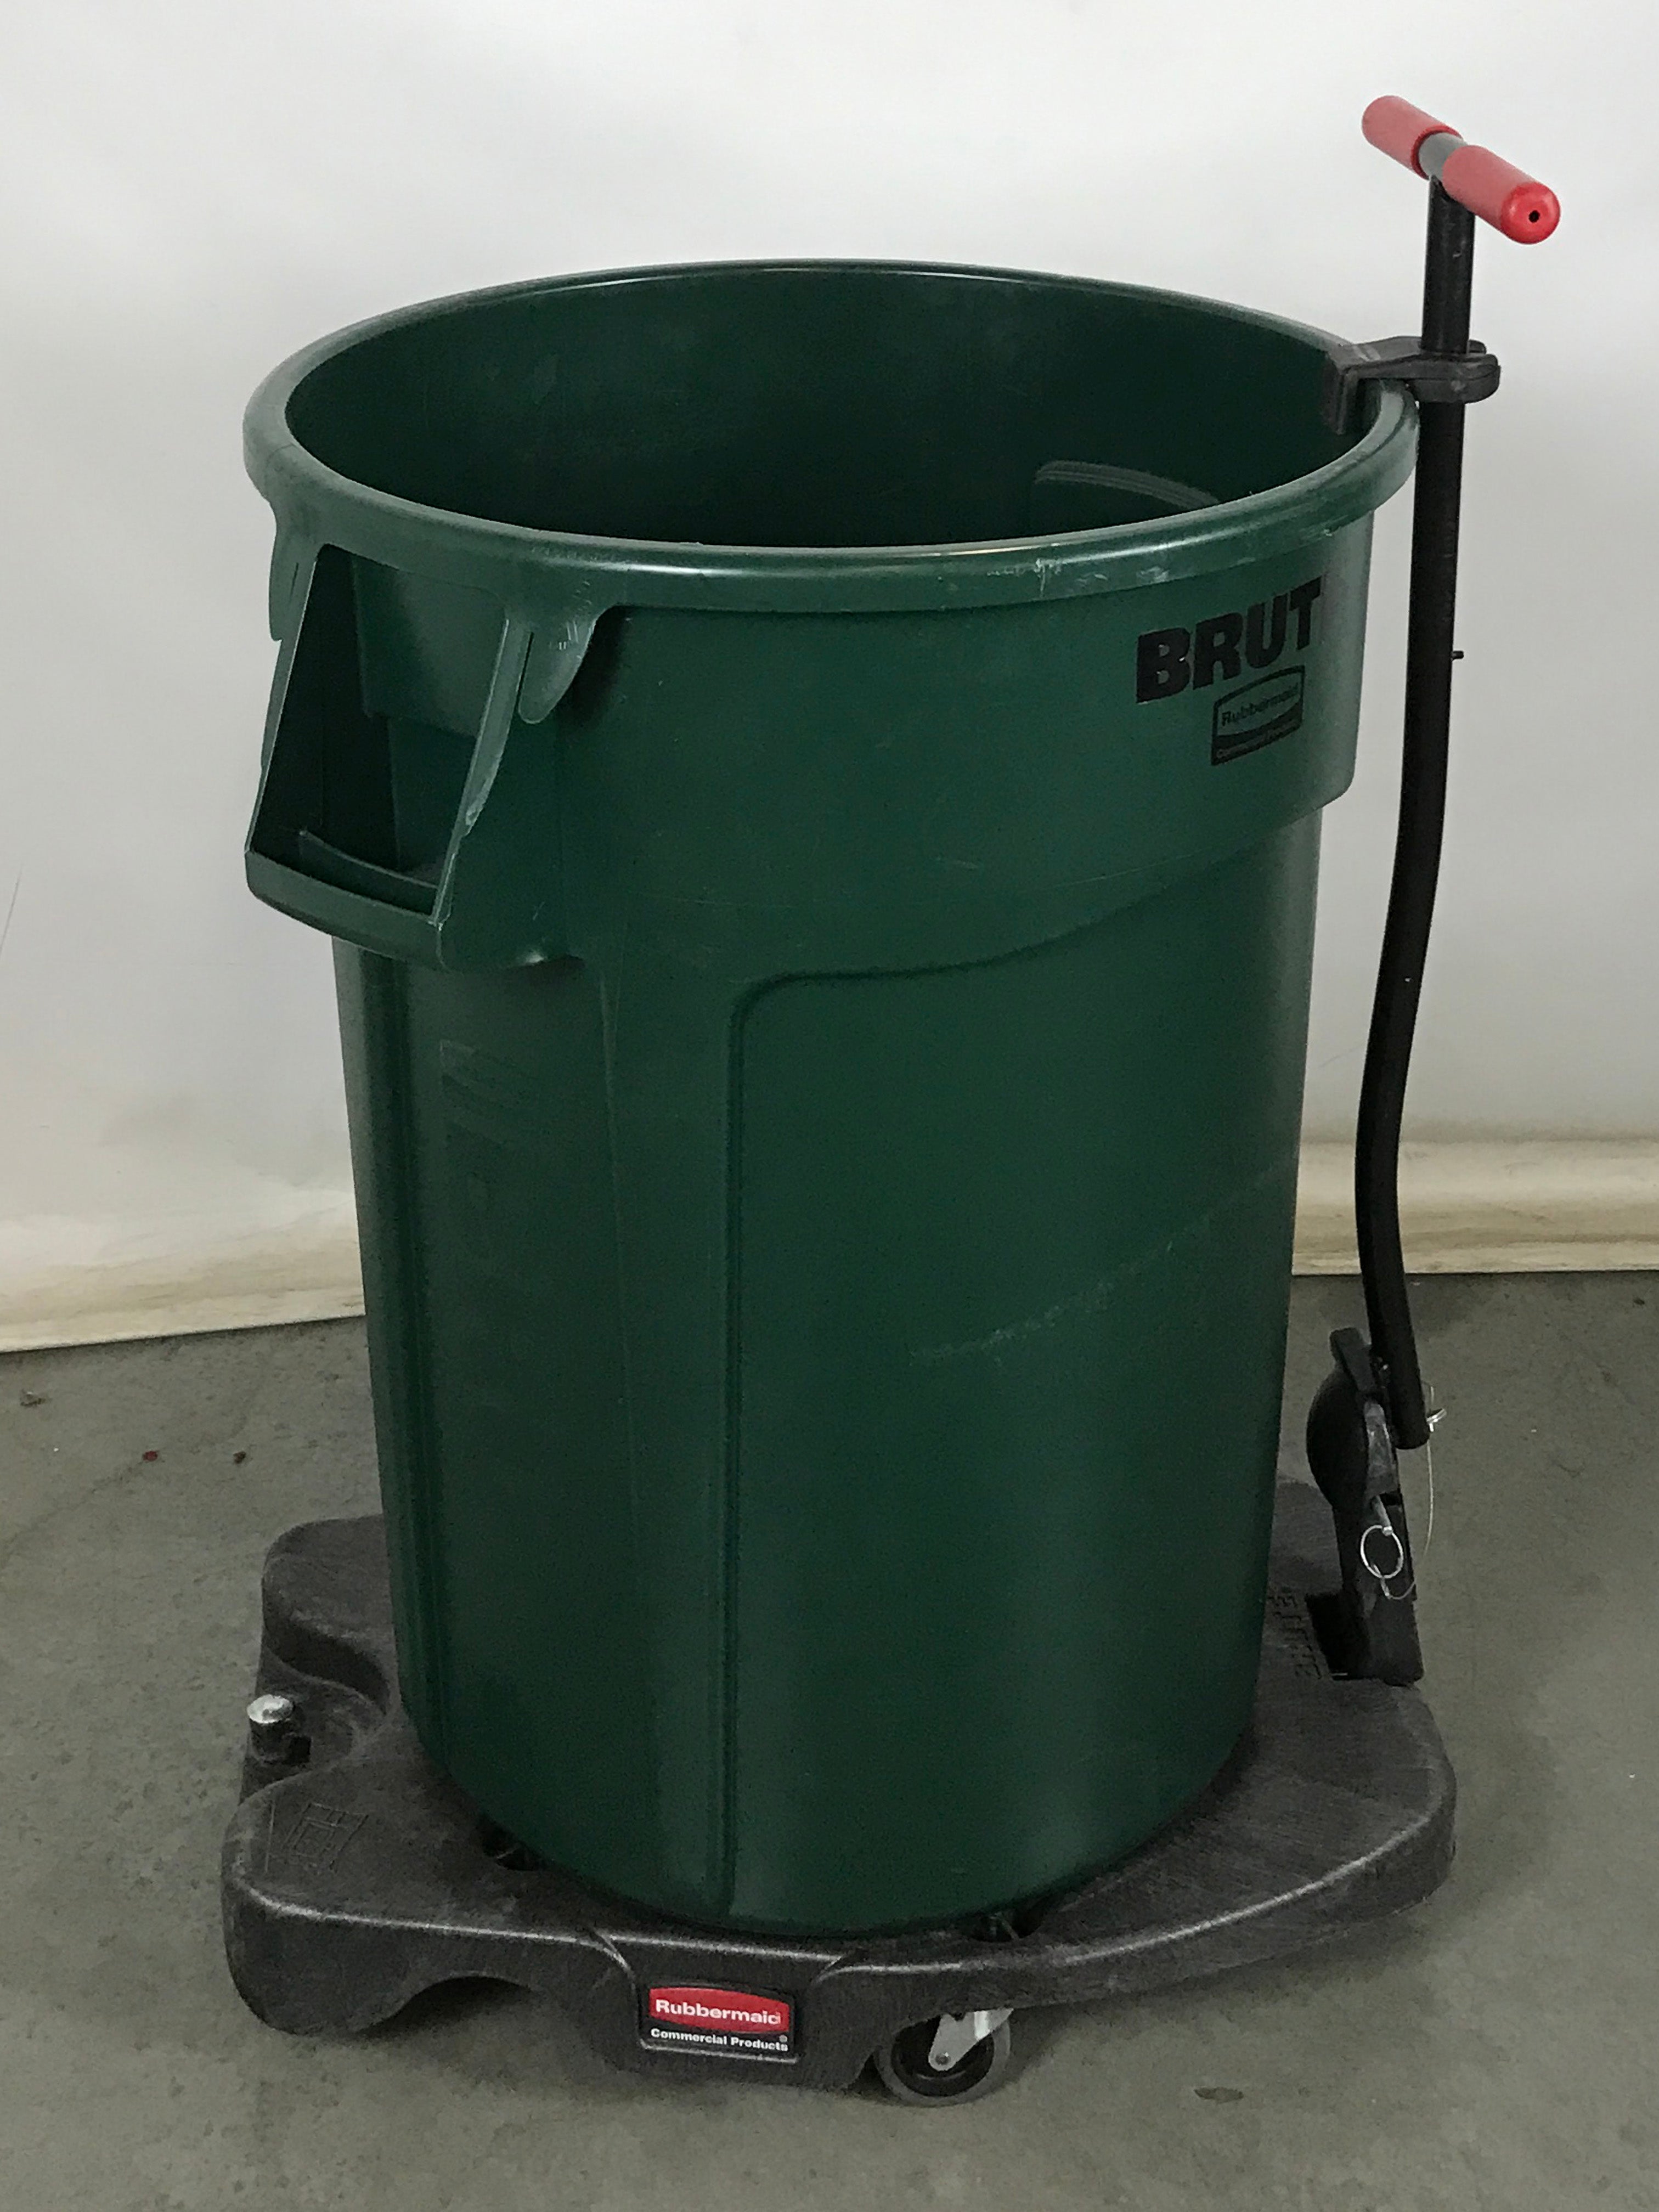 Brute Rubbermaid Trash Bin with Rolling Trolley Attachment and Handle